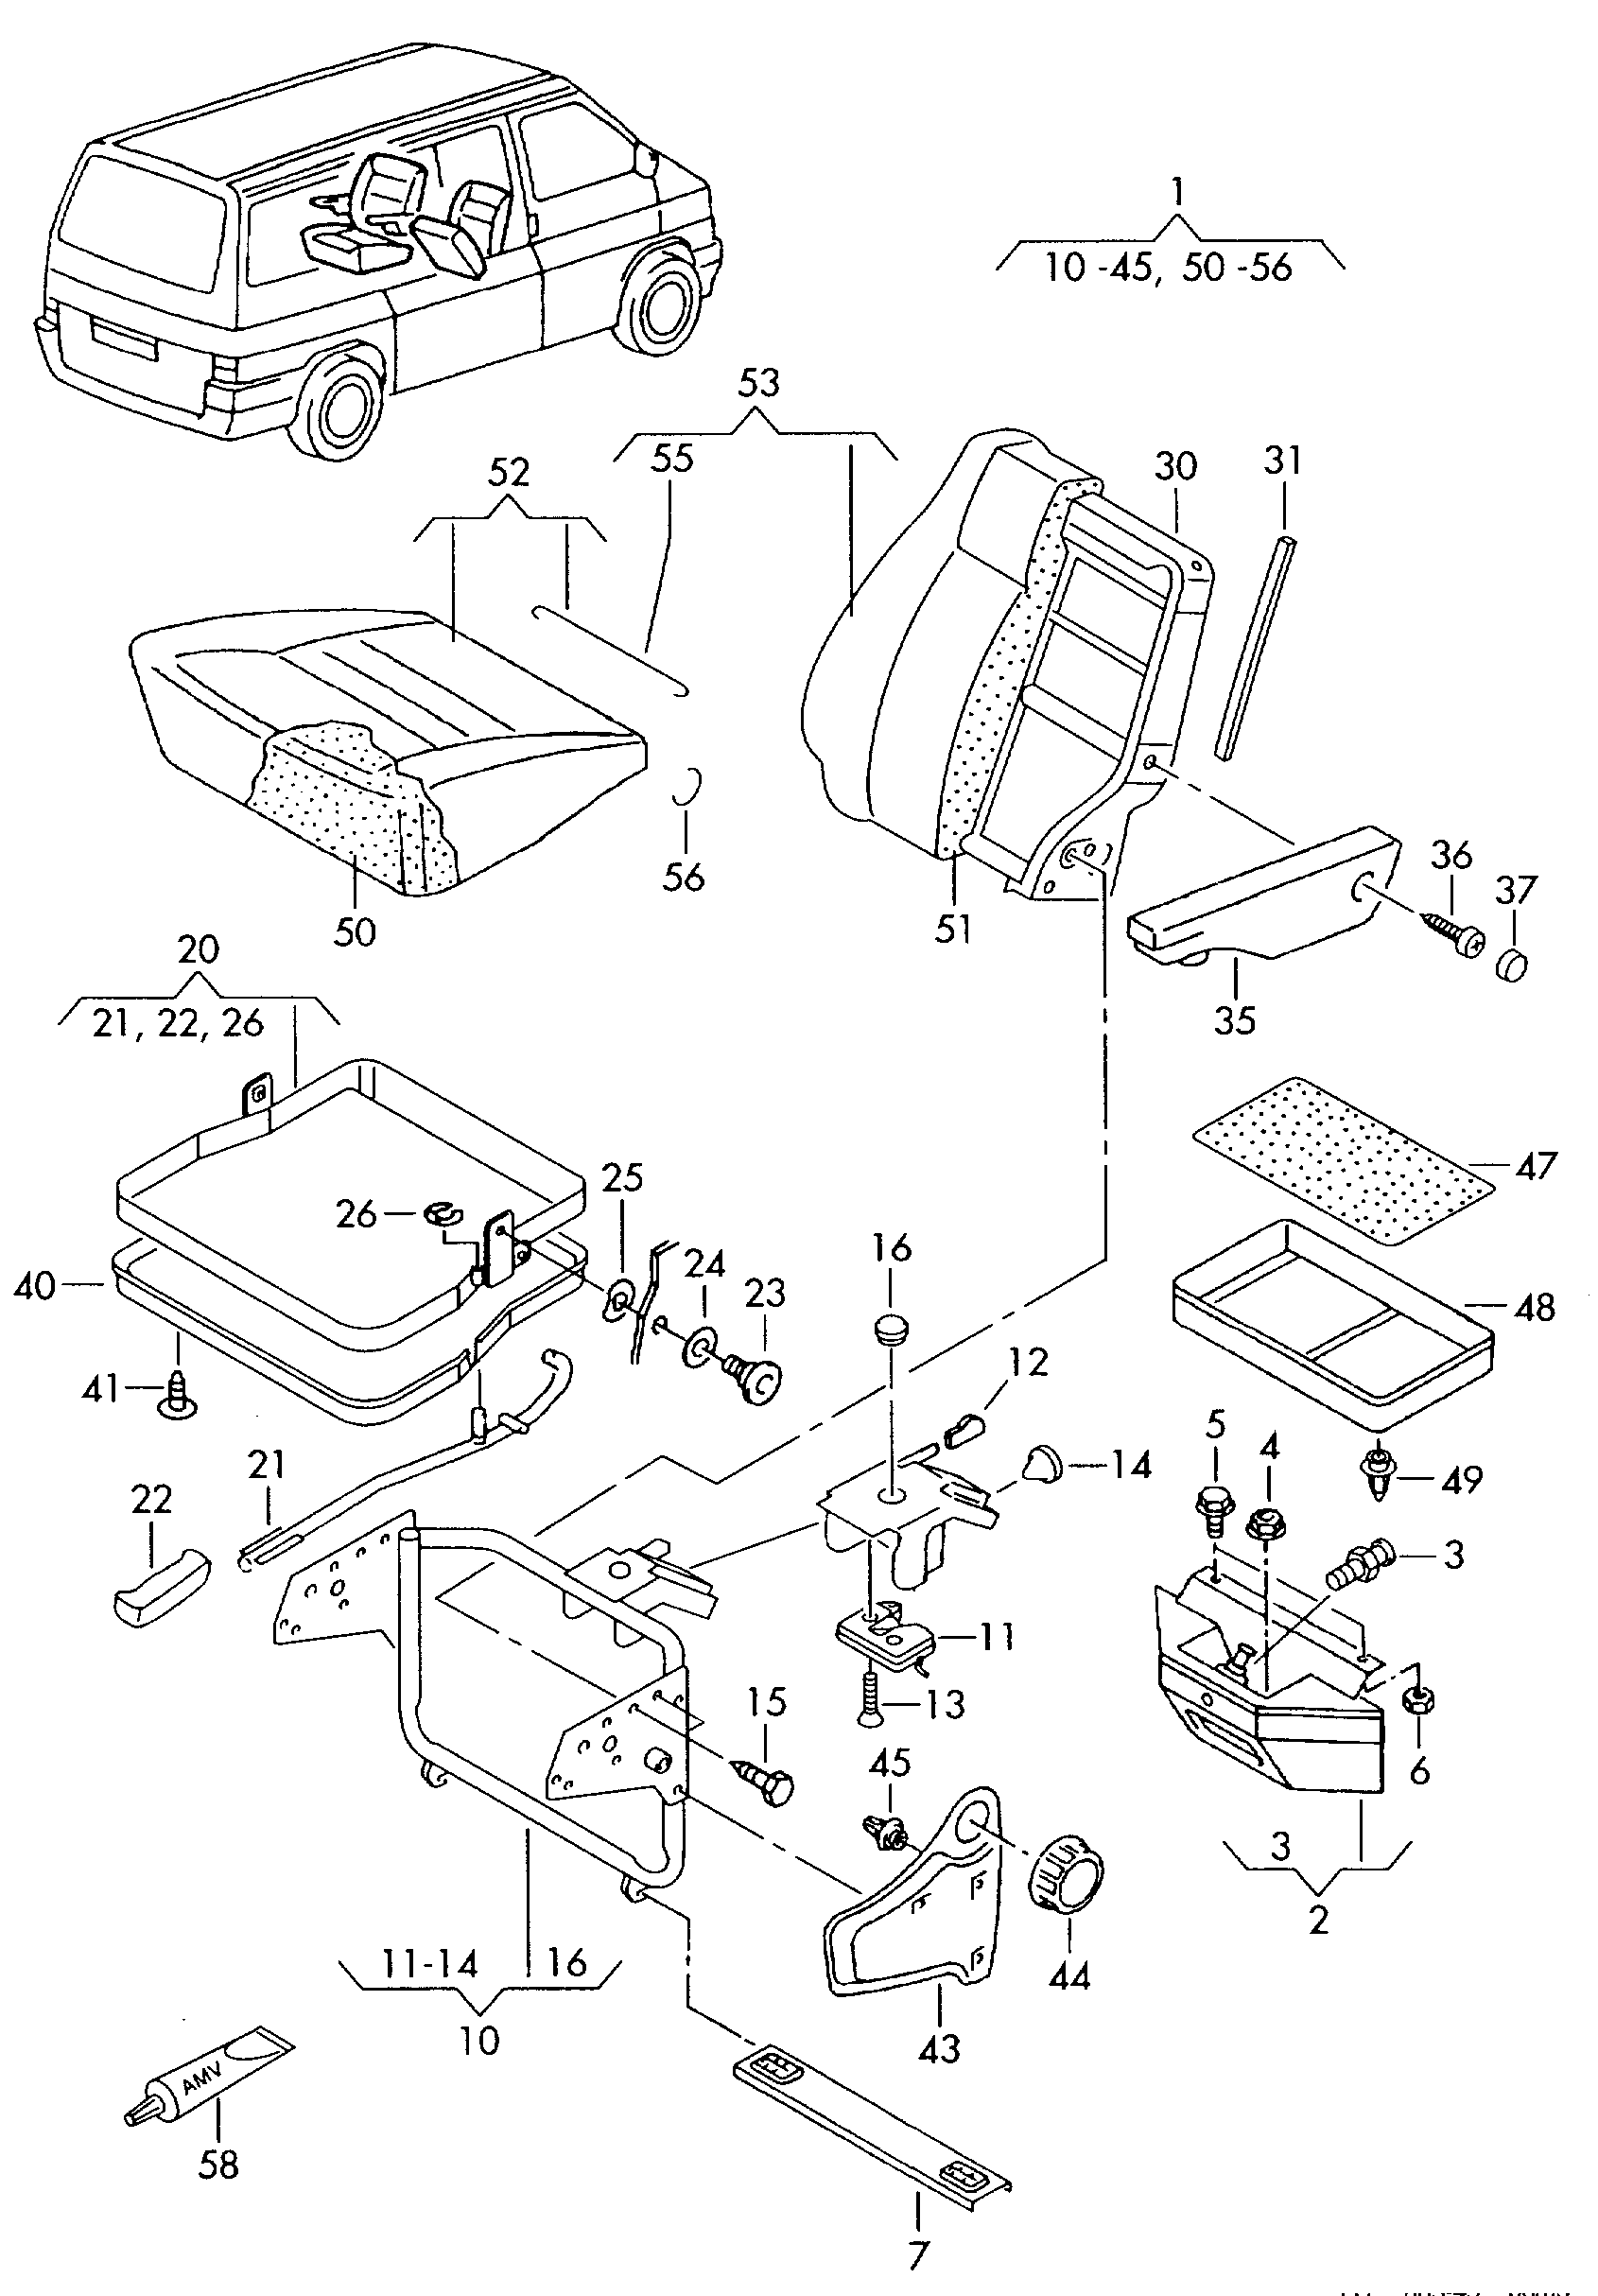 Folding seat in passenger comp  - Transporter syncro - trsy